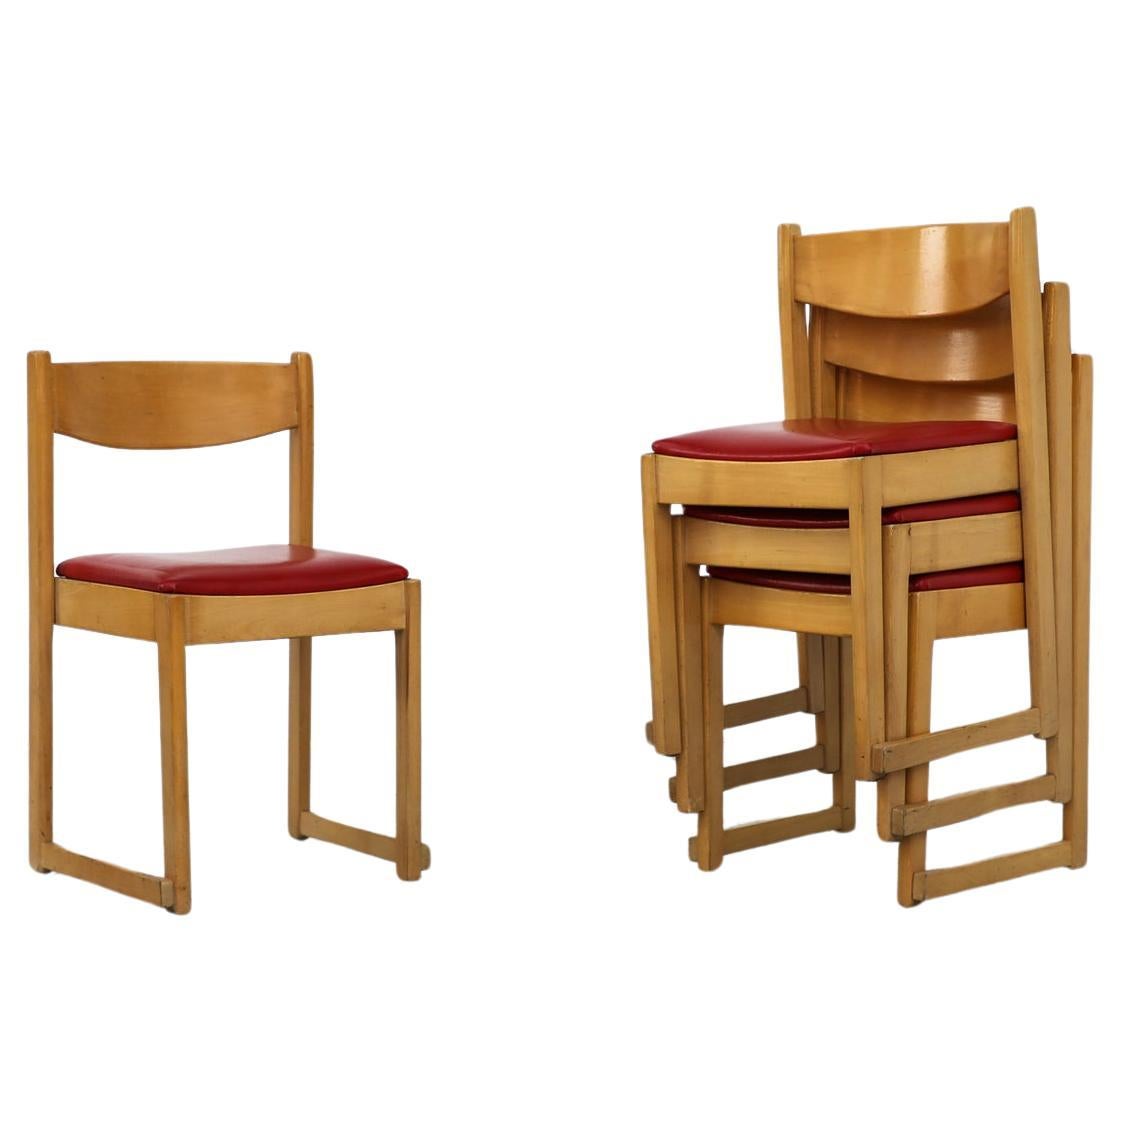 Set of 4 Sven Markelius Style Stacking Chairs with Red Skai Seats